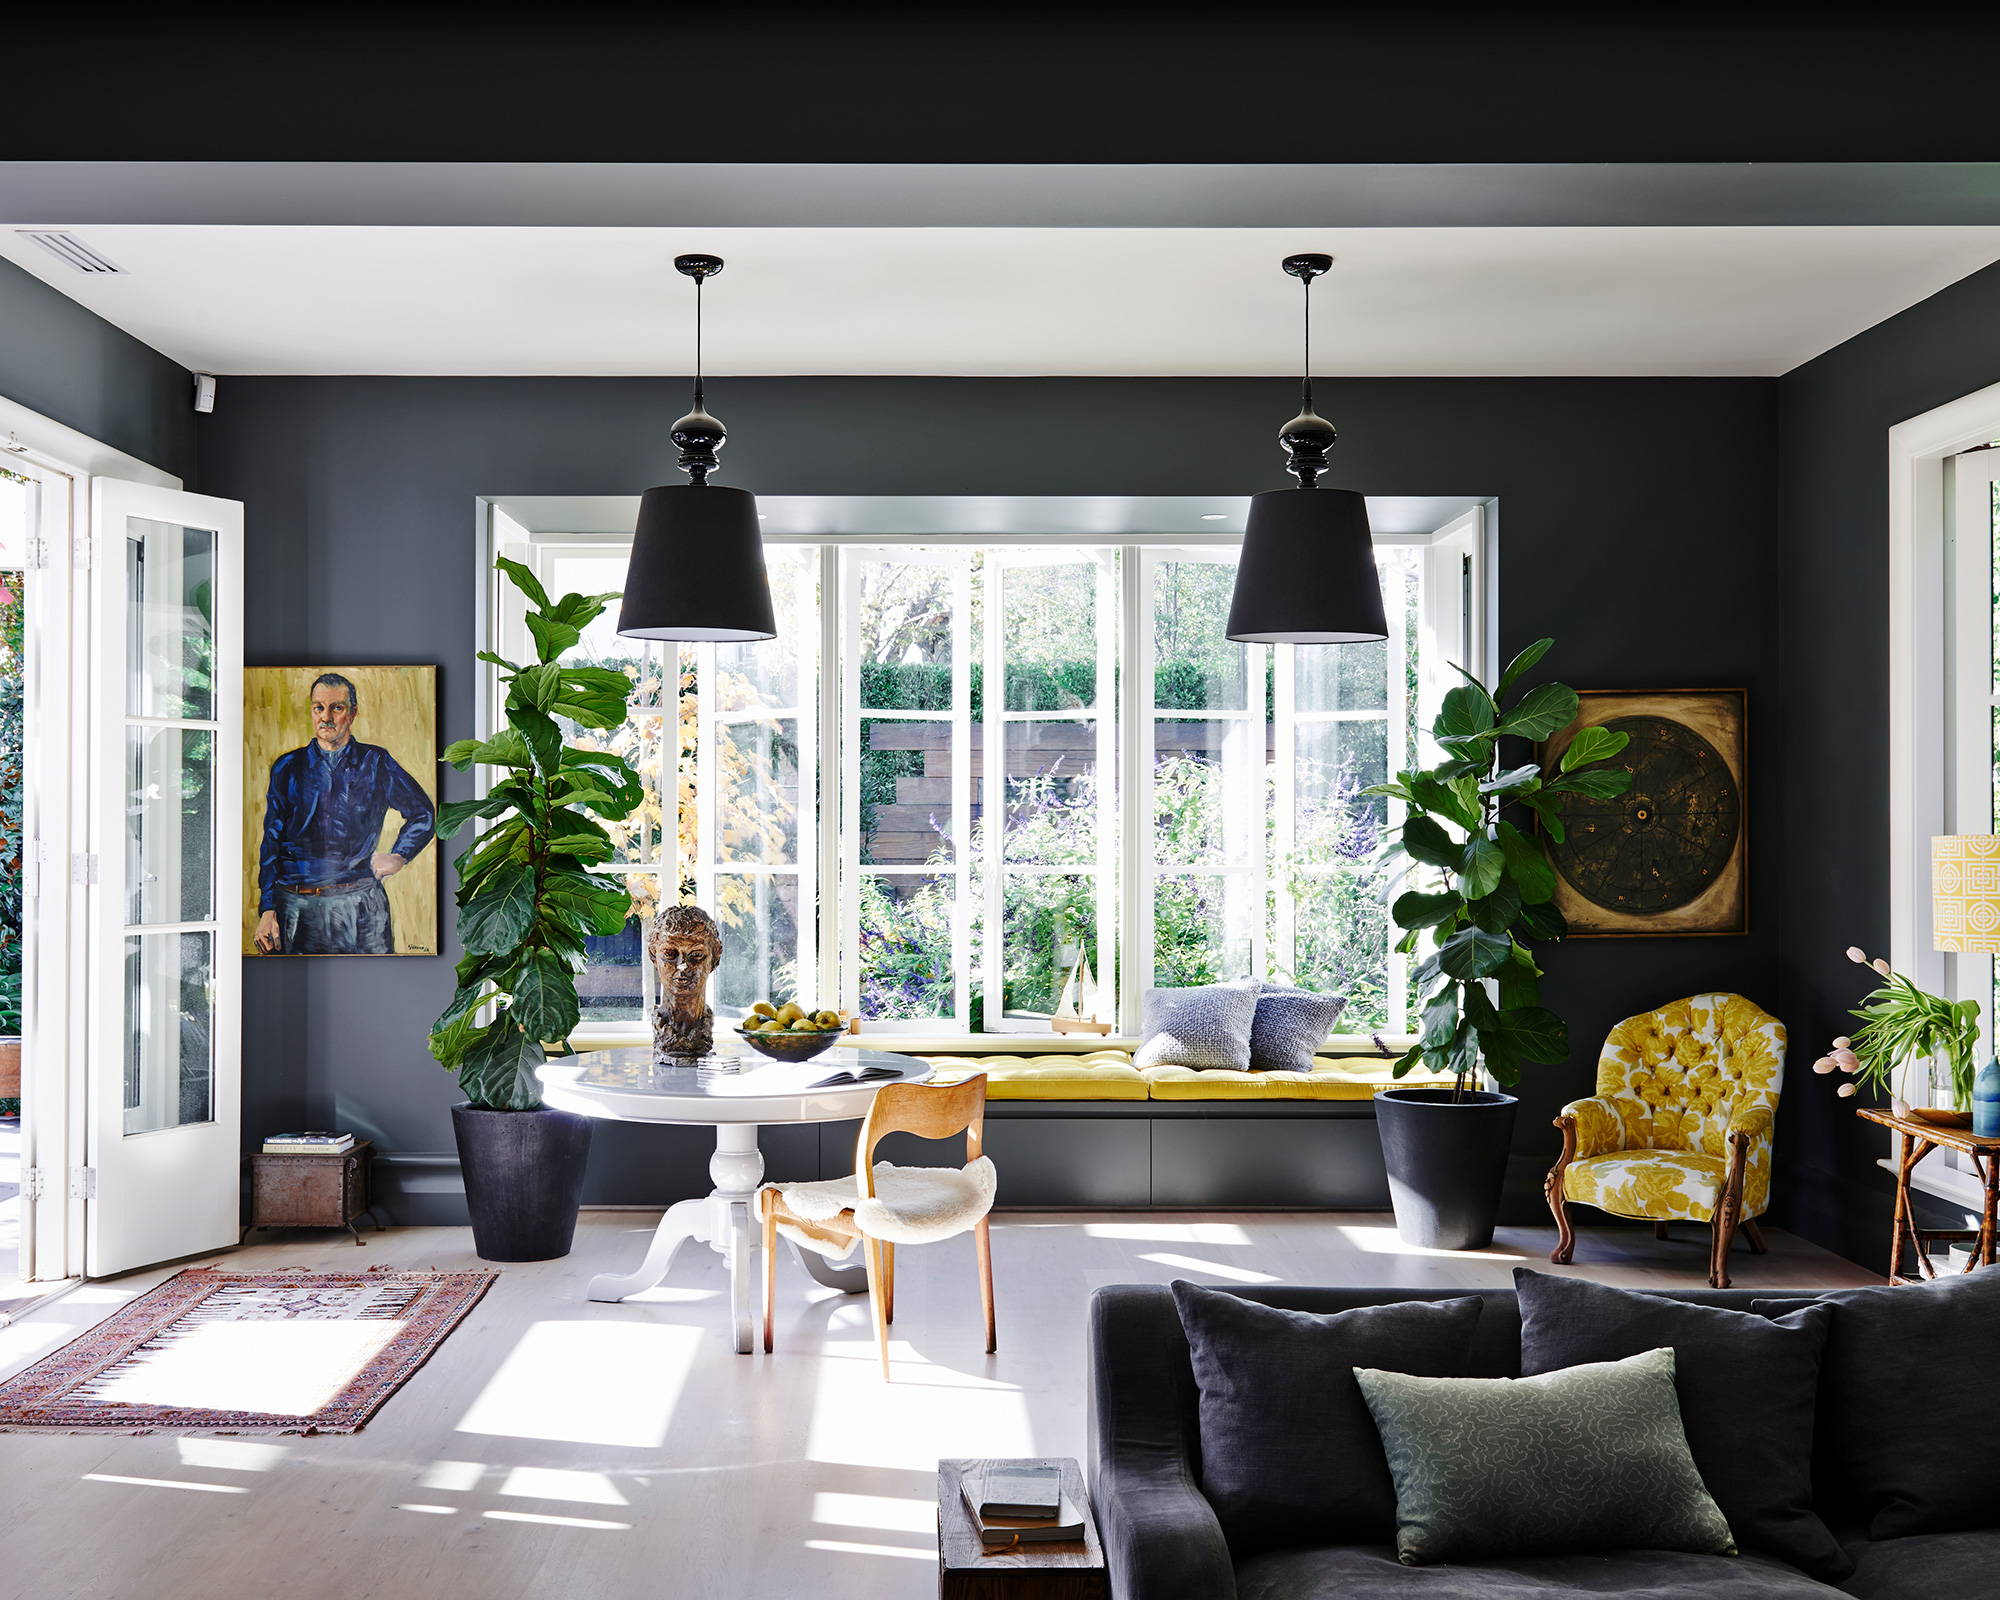 Dark grey living room ideas shown with mustard yellow accents and white flooring.